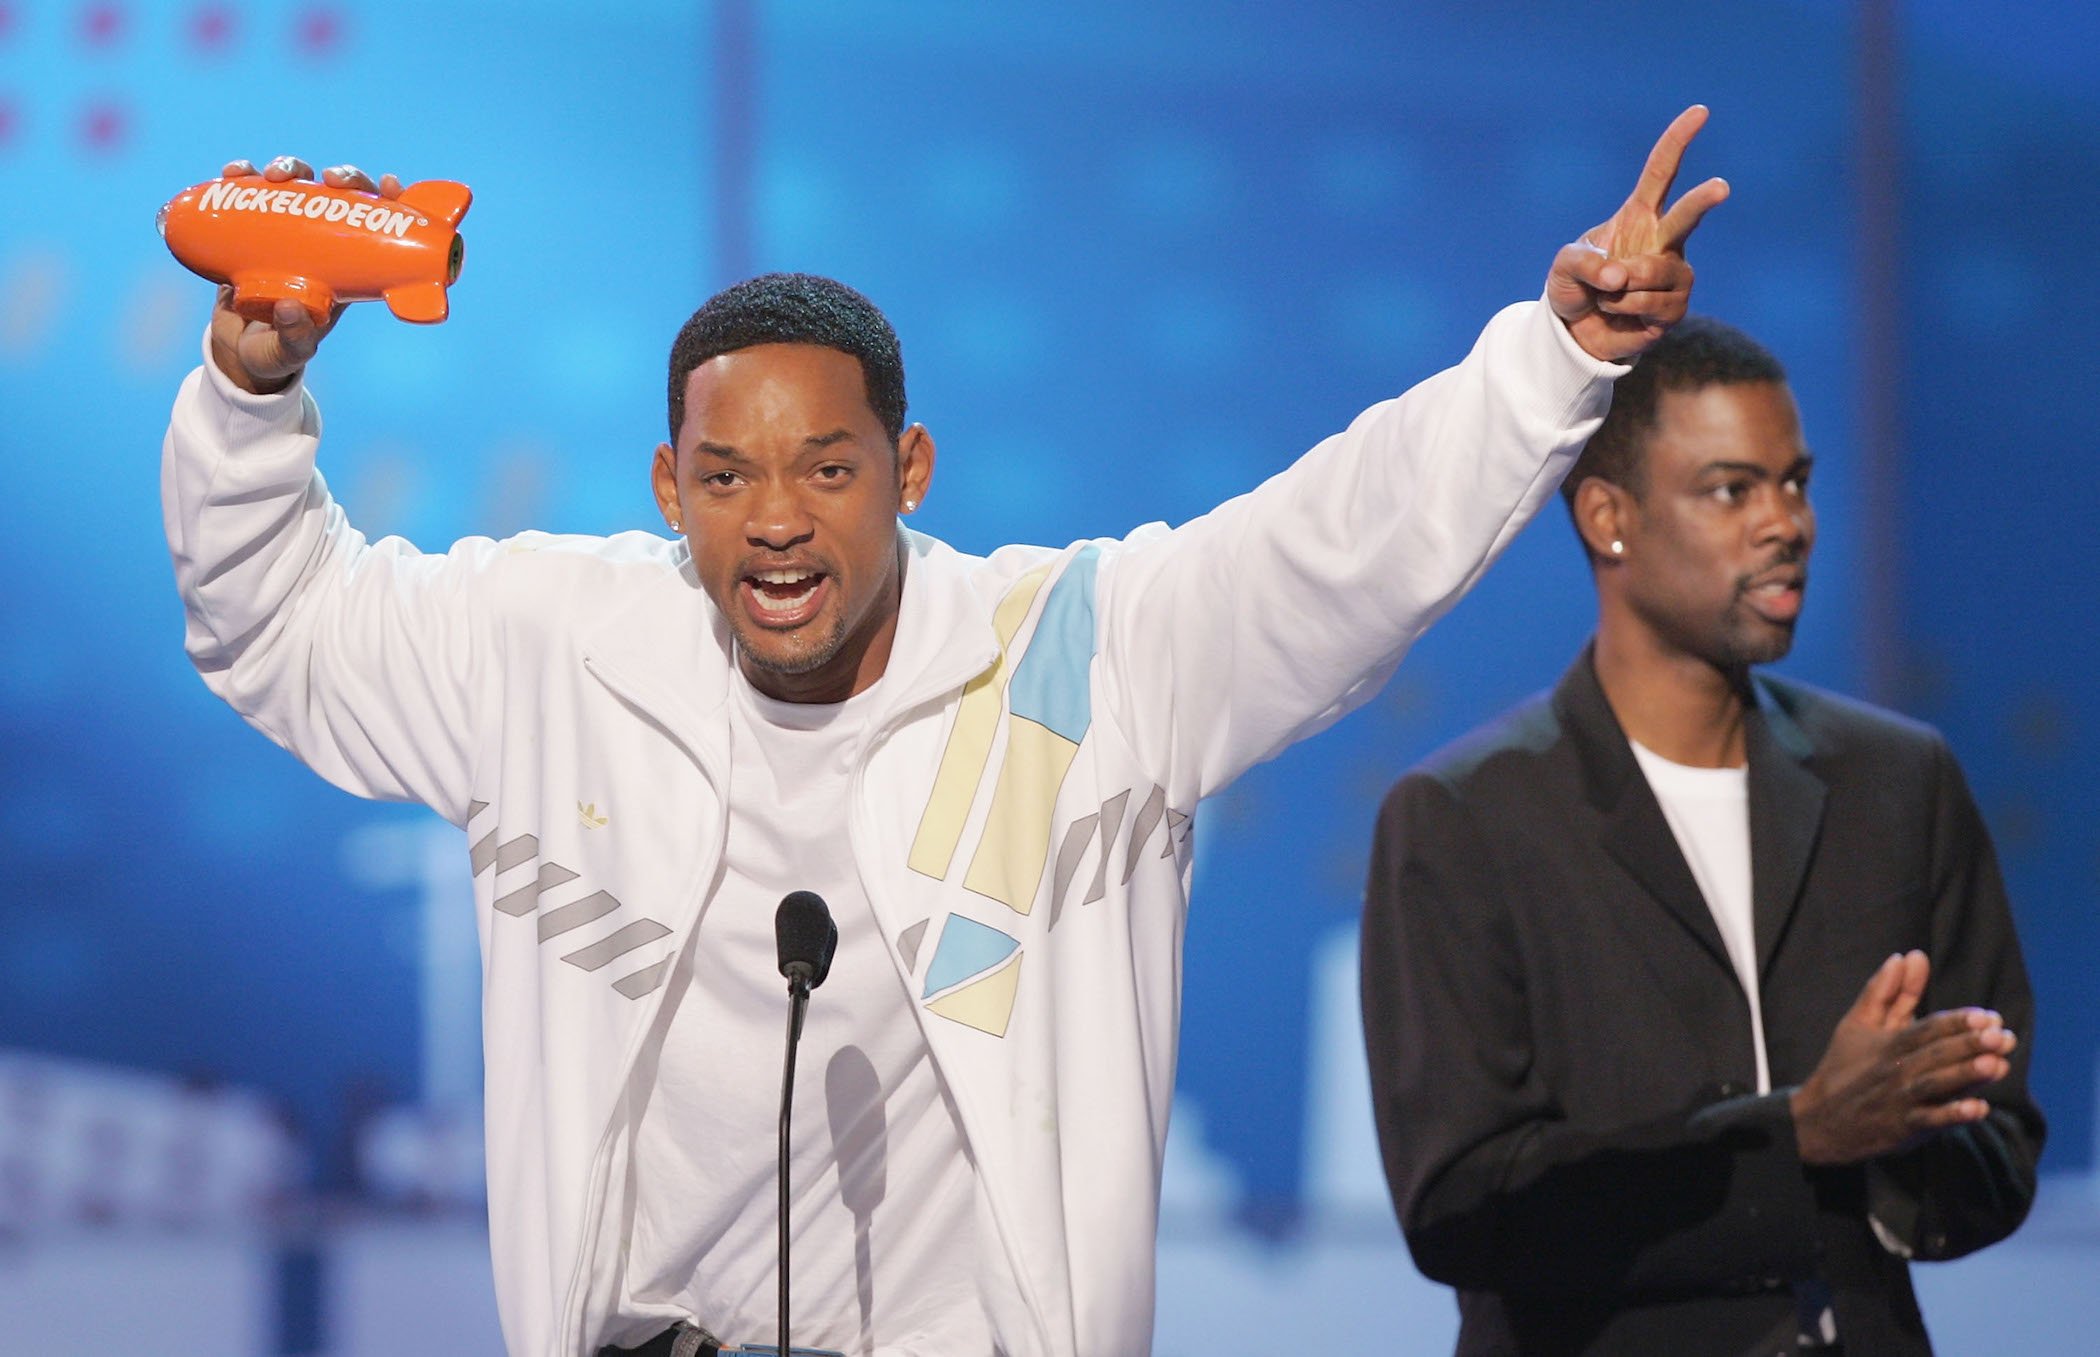 Will Smith at the Kids Choice Awards accepting an award with Chris Rock in the background. Will Smith is excitedly standing at the podium holding his award.